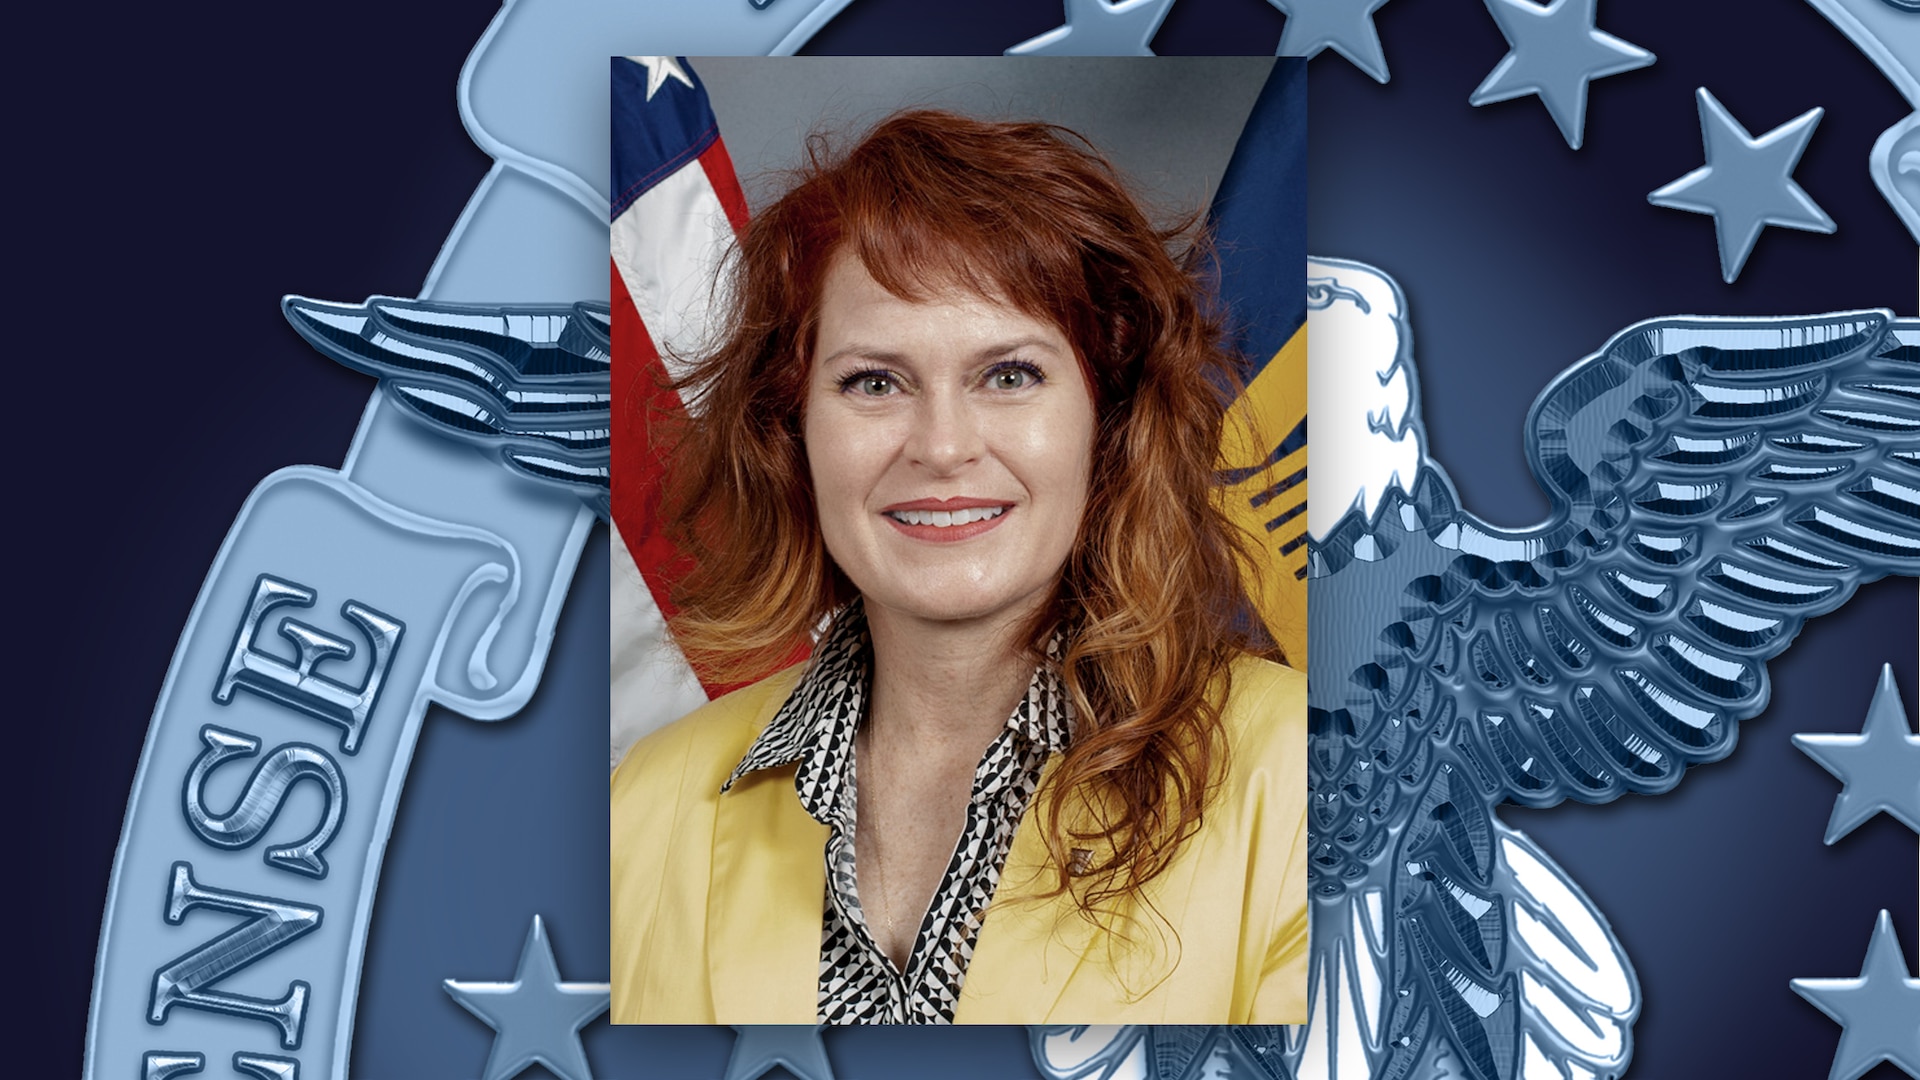 White woman with red hair and yellow jacket poses for a head/shoulders photo in front of the US flag.